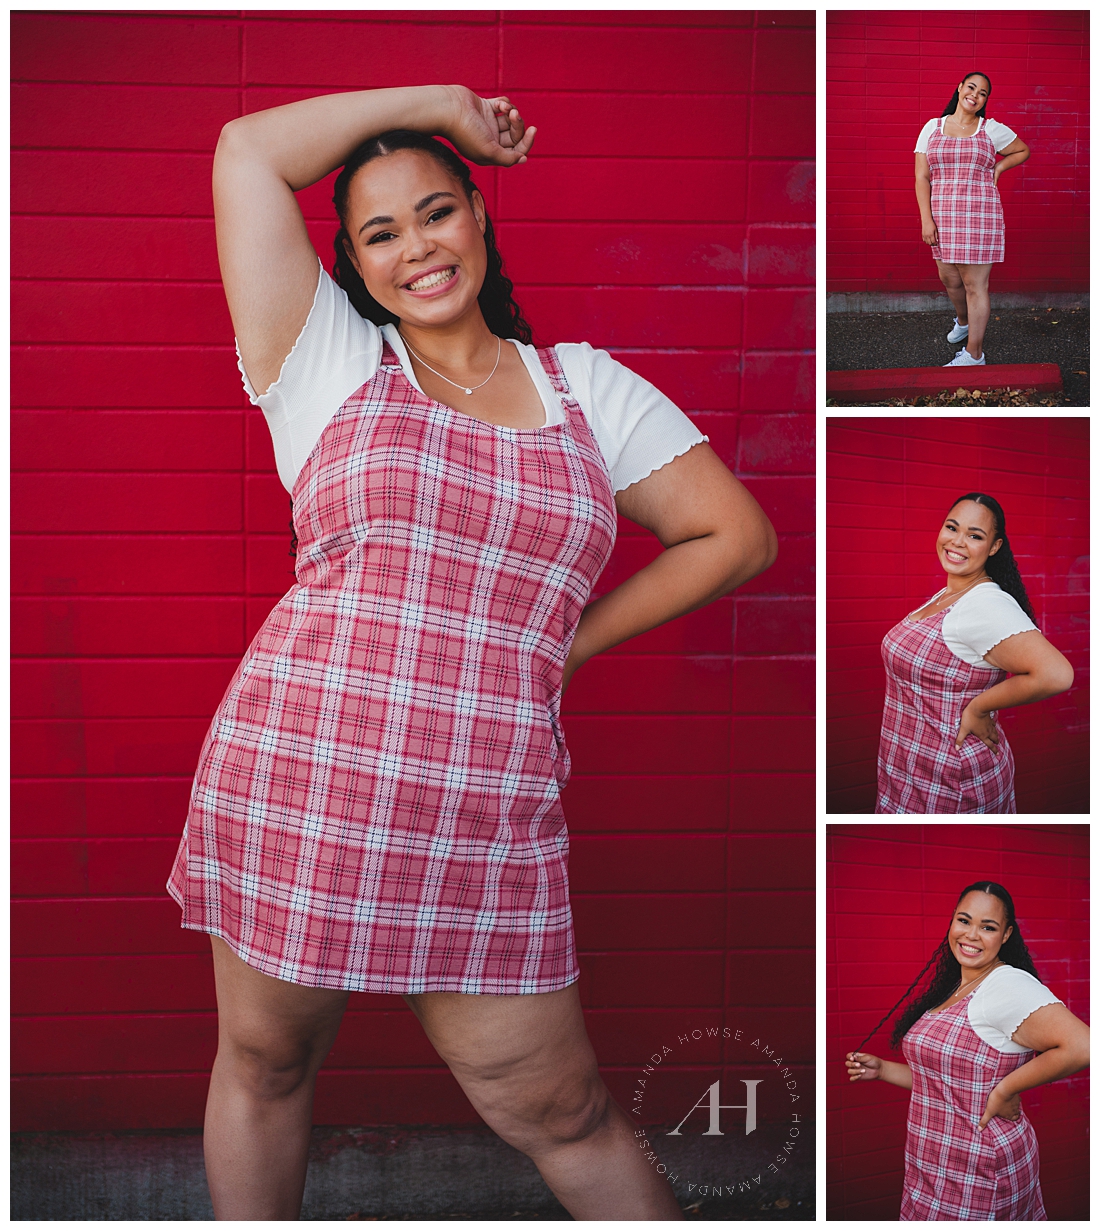 Clueless Inspired Outfit for Senior Pics | Painted Red Wall, Urban Photoshoot | Photographed by the Best Tacoma Senior Photographer Amanda Howse Photography